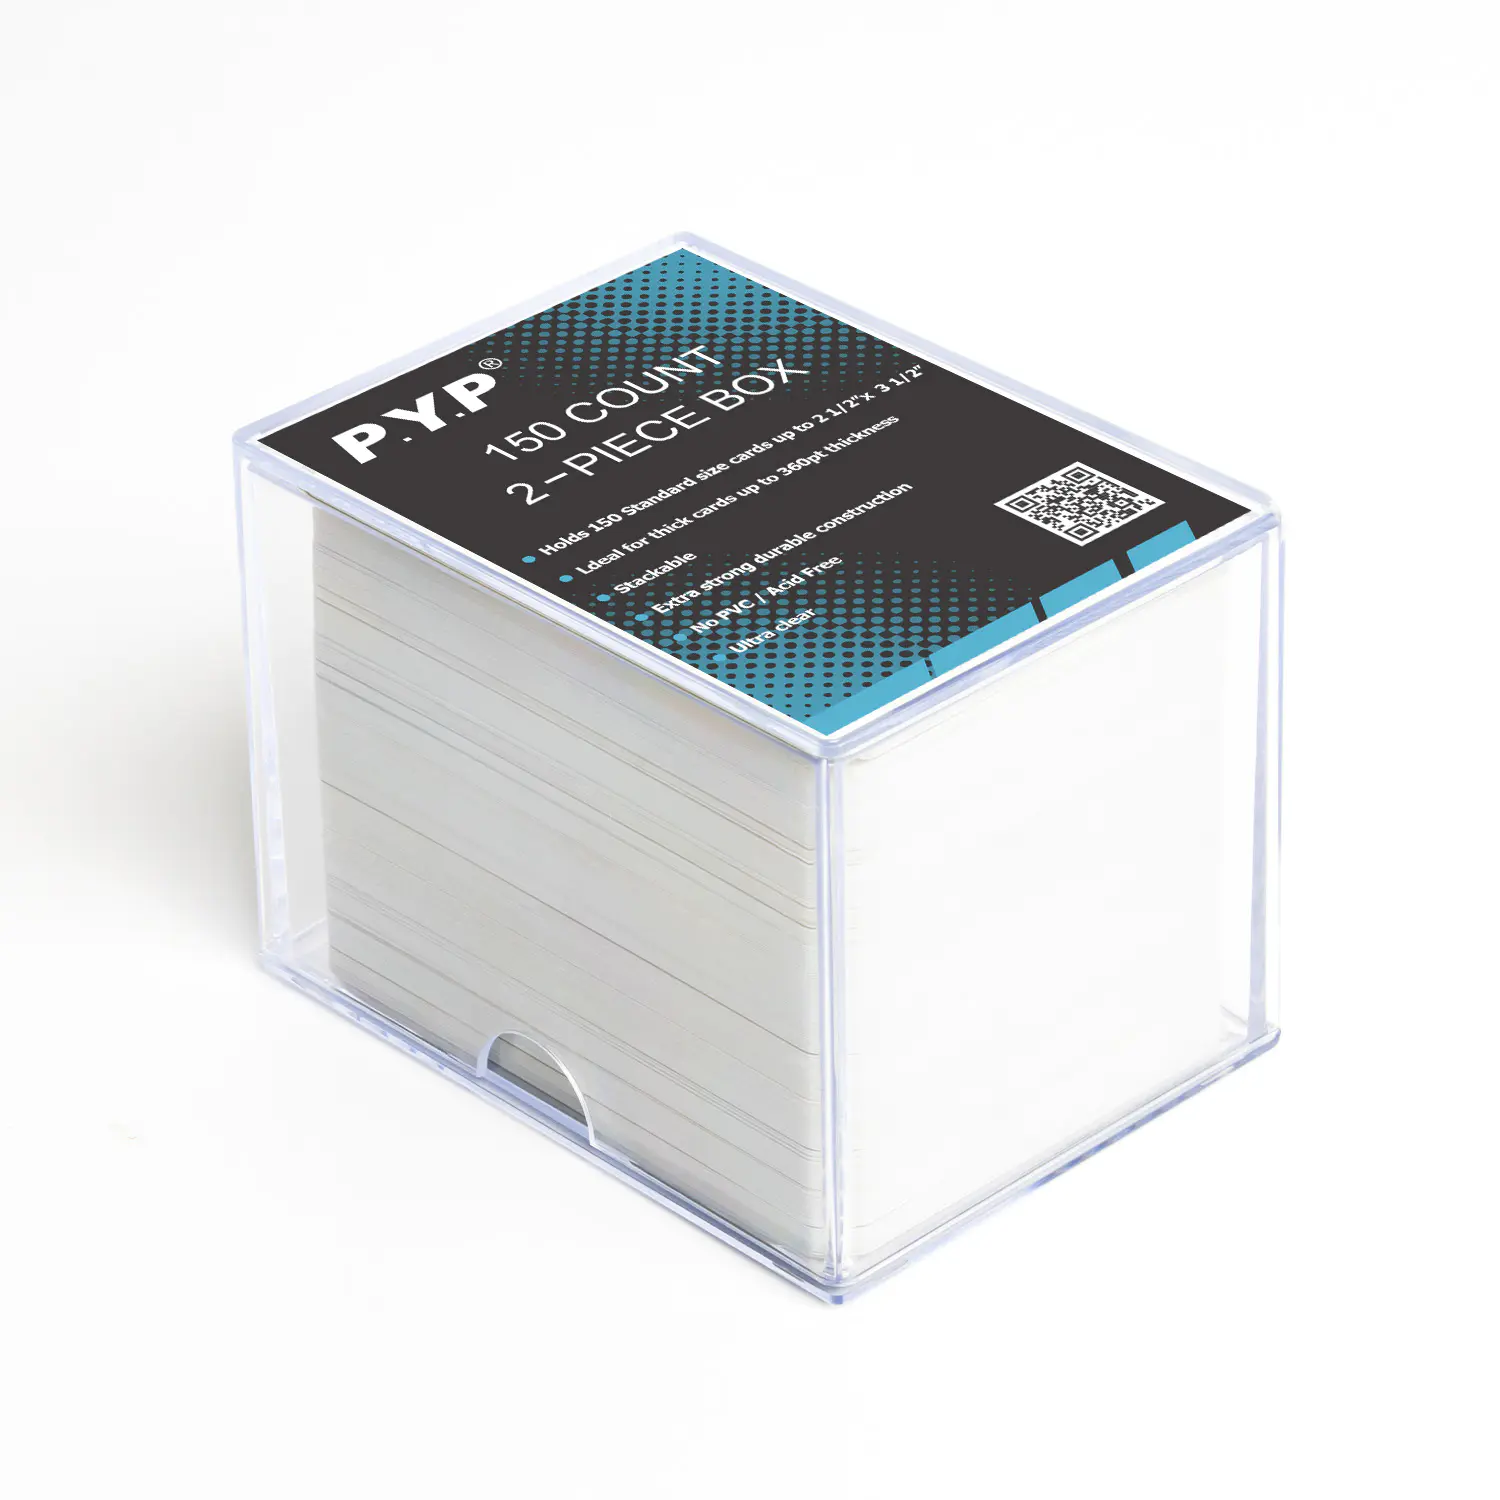 2-Piece Slider Trading Card Box - 150 Count